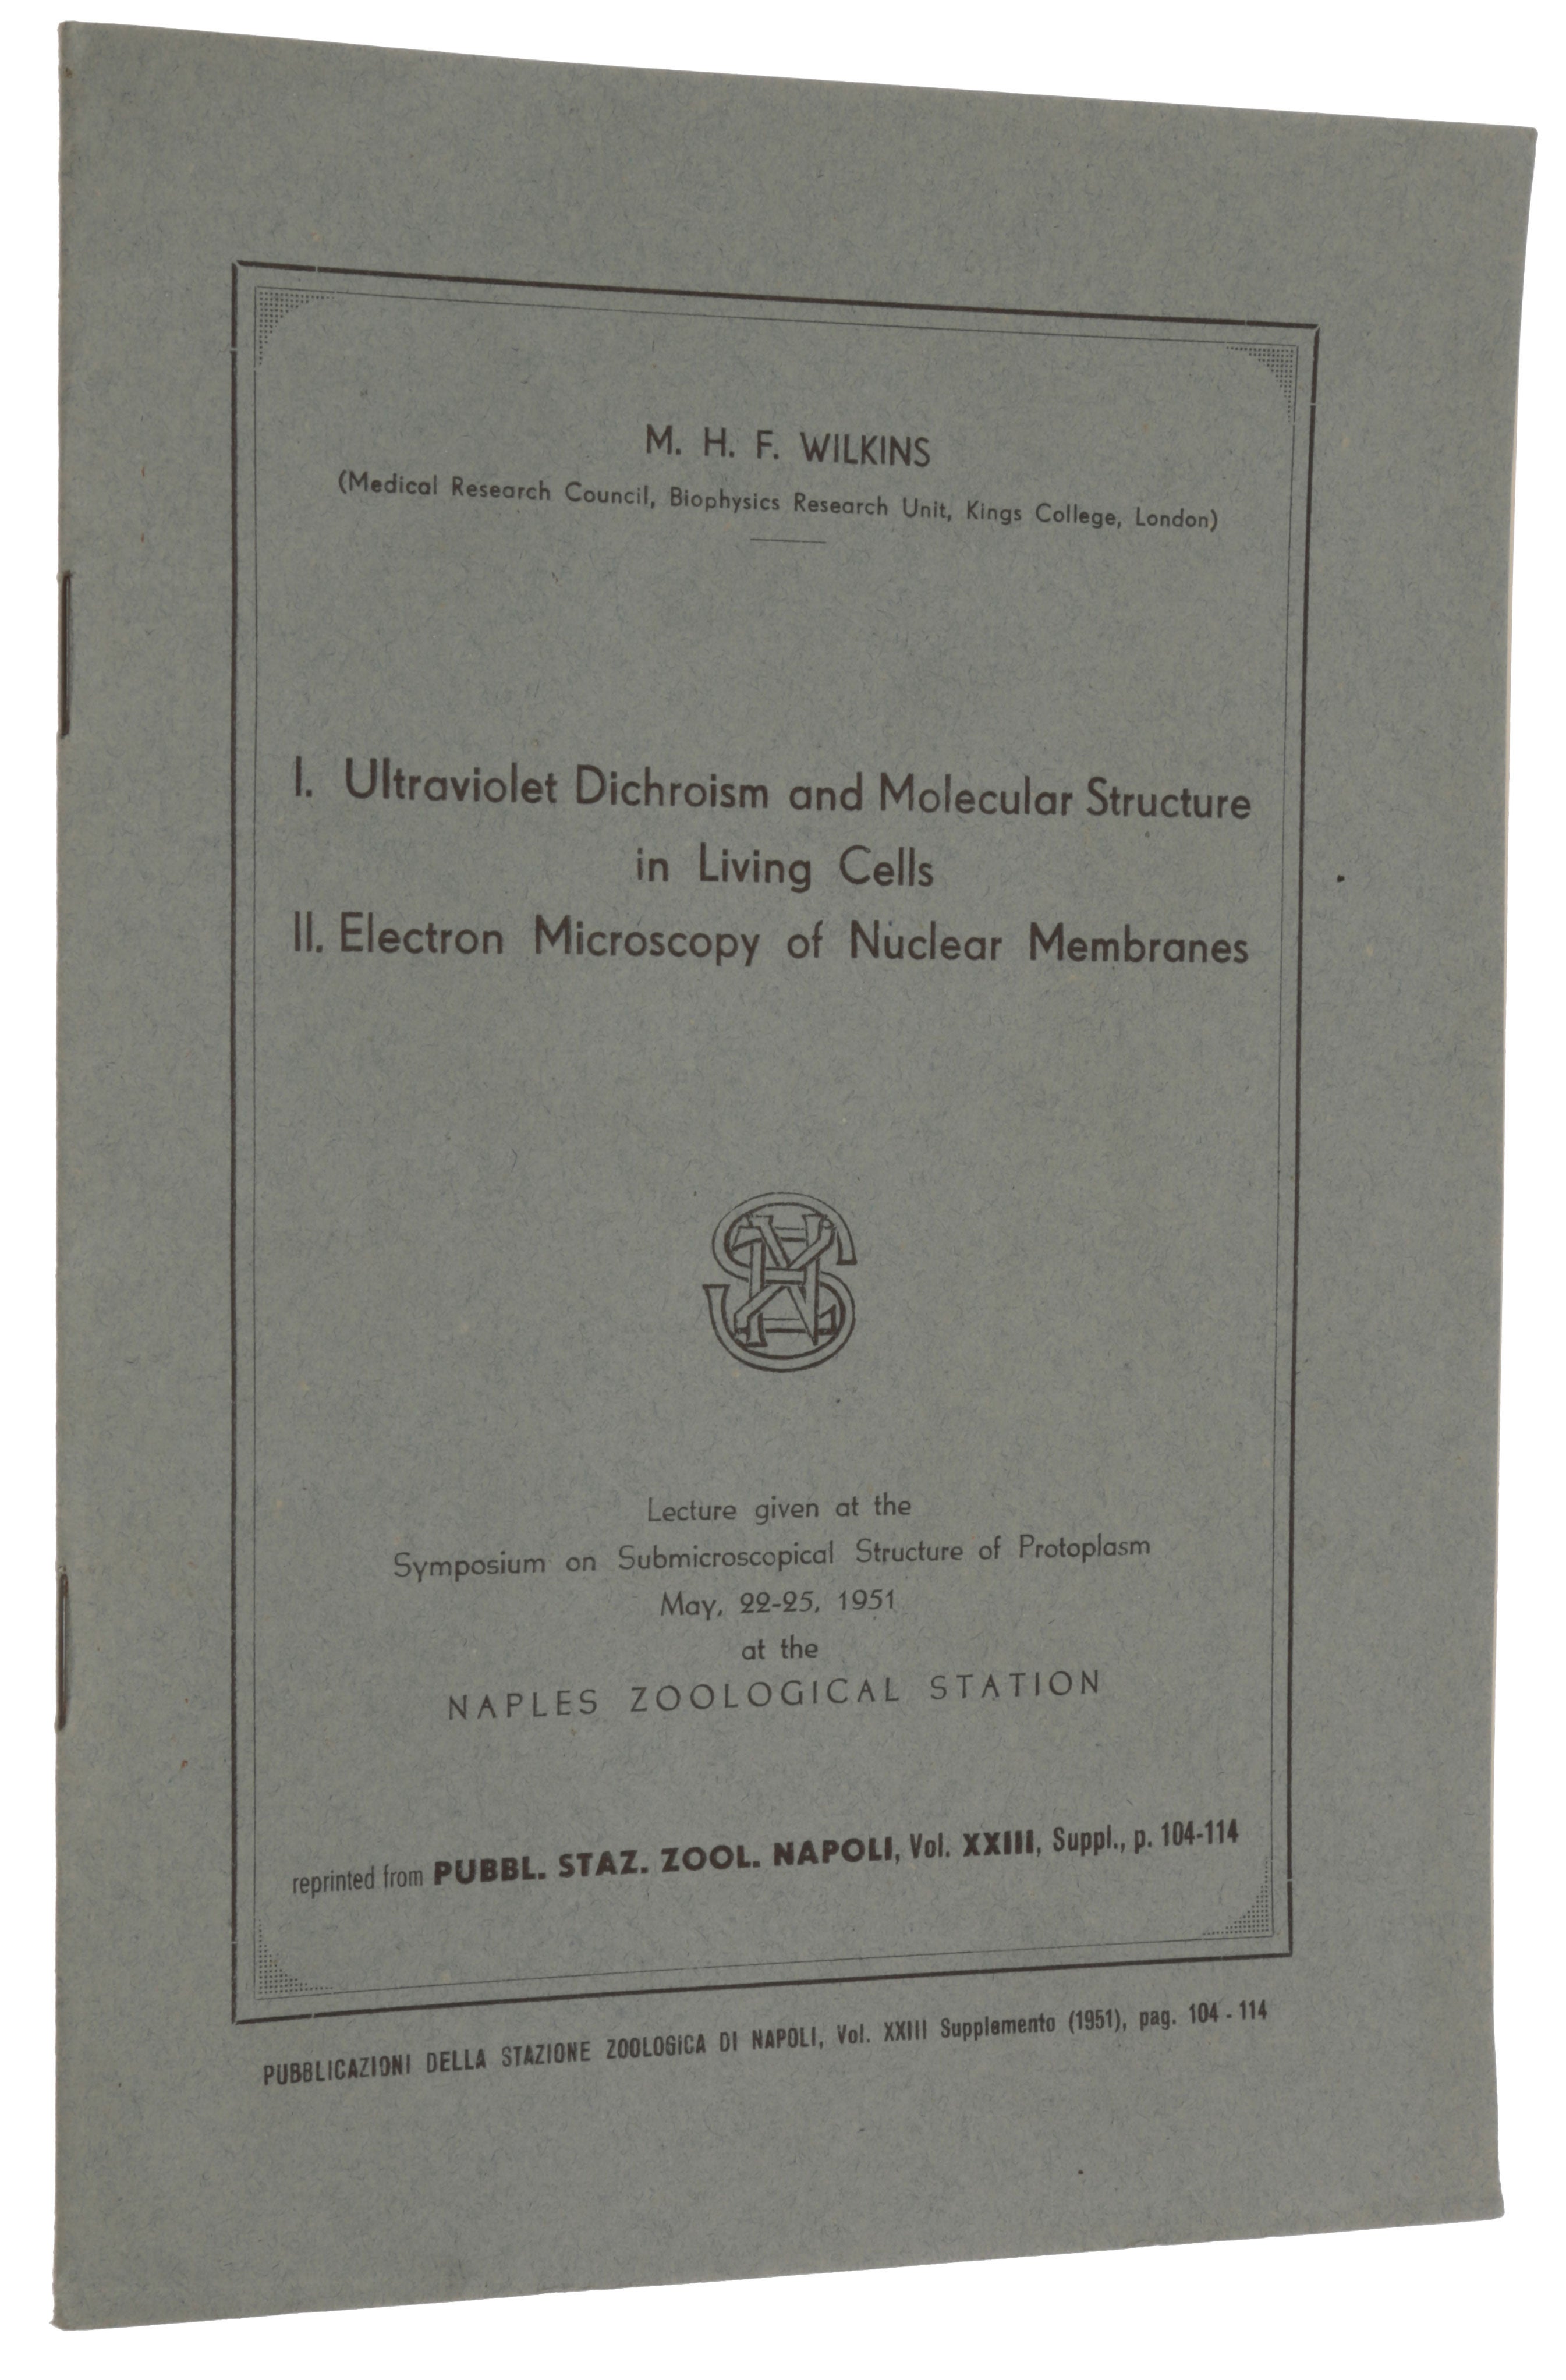 Item #5007 I. Ultraviolet dichroism and molecular structure in living cells. II. Electron microscopy of nuclear membranes. Lecture given at the Symposium on Submicroscopical Structure of Protoplasm, May 22-25, 1951, at the Naples Zoological Station. Offprint from: Pubblicazioni della Stazione Zoologica di Napoli, Vol. XXIII, Supplemento. Maurice Hugh Frederick WILKINS.